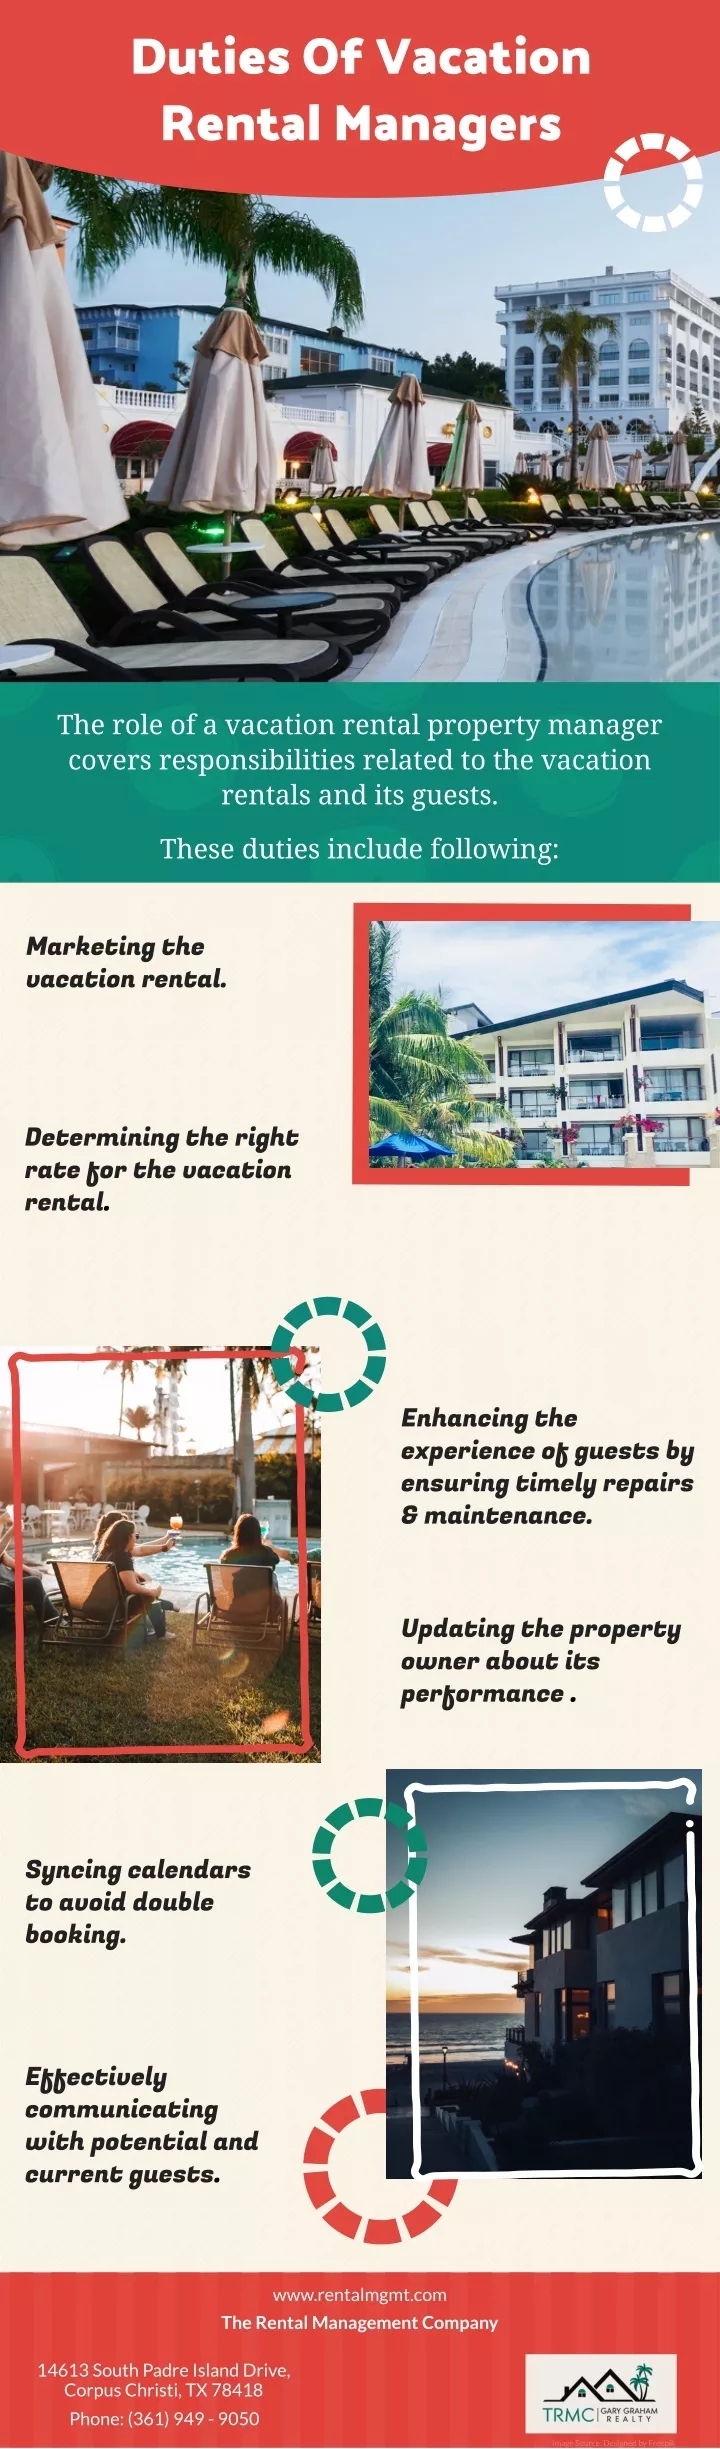 duties of vacation rental managers